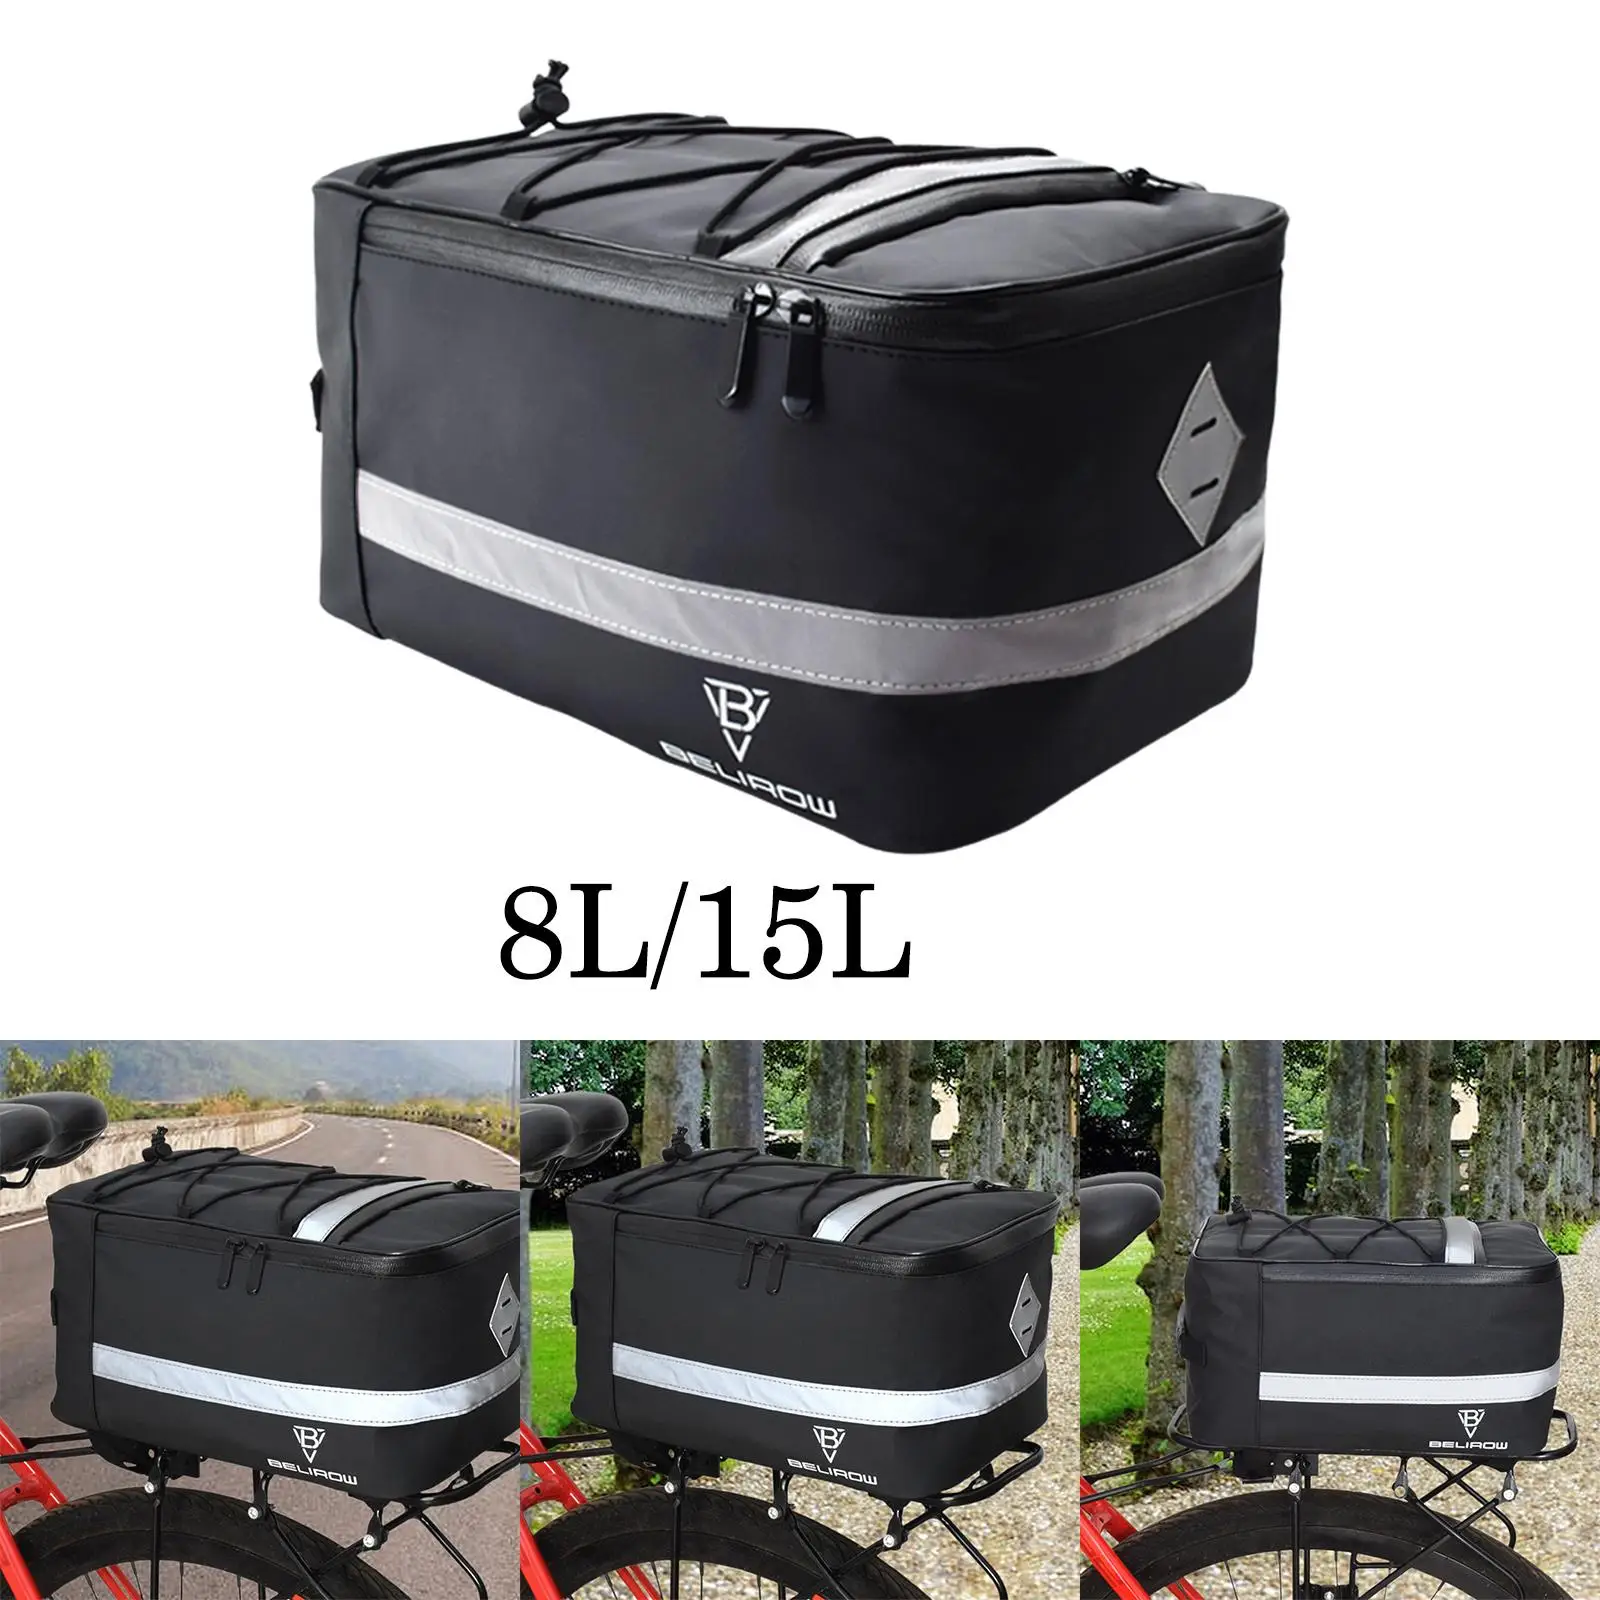 Bike Rear Seat Carrier Cargo Bag Reflective Stripe for Long Distance Riding Multi Functional Large Capacity Accessory Riding Bag